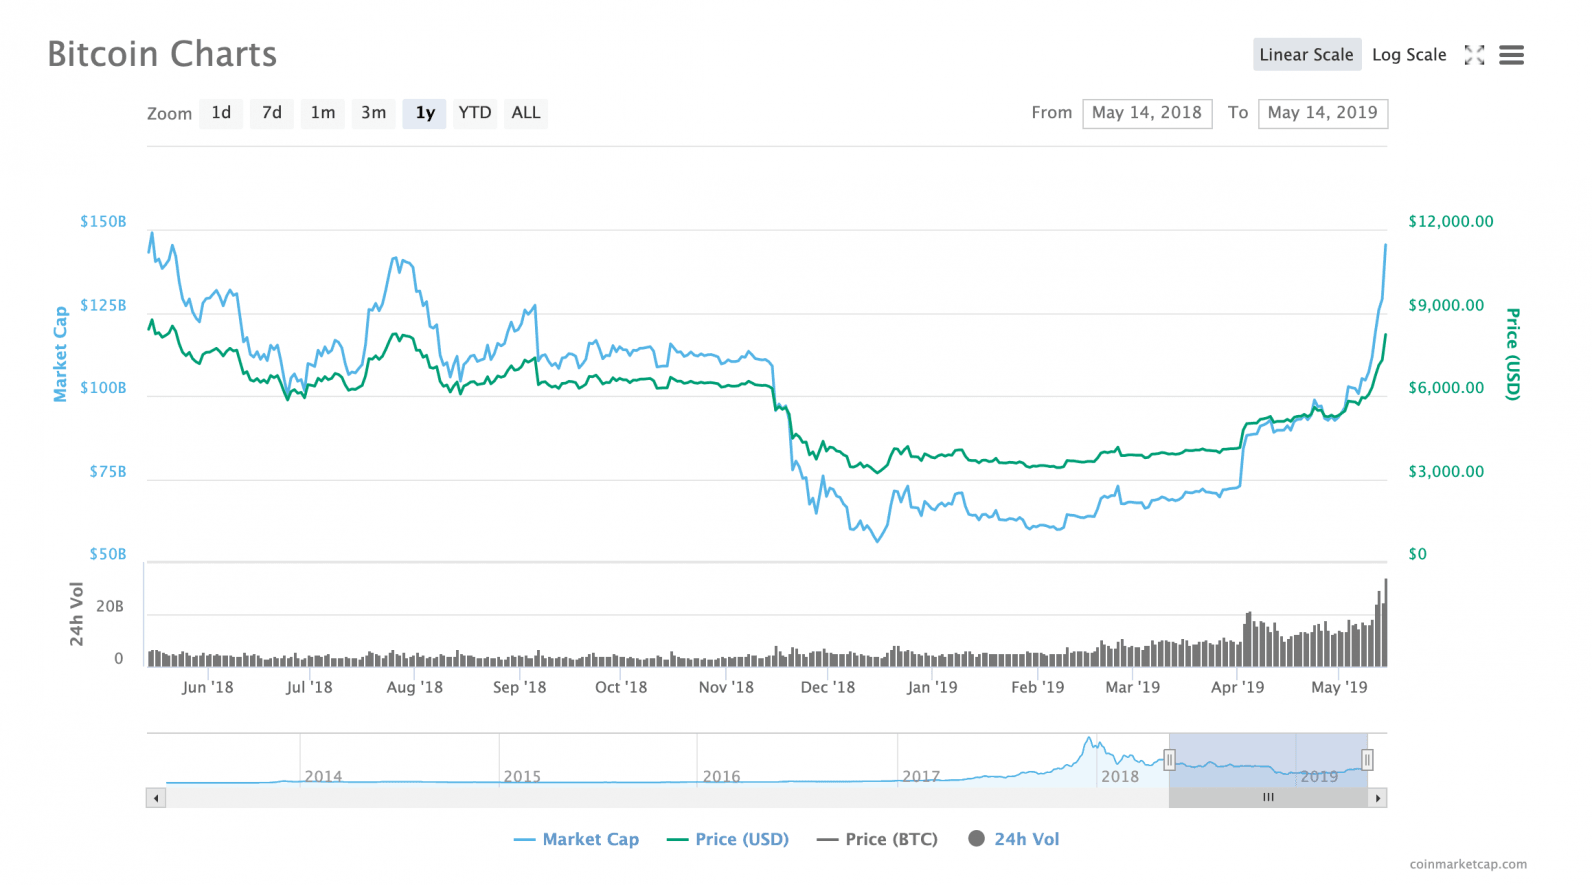 Bitcoin breaks past $8,000 to hit yet another 2019 price ...